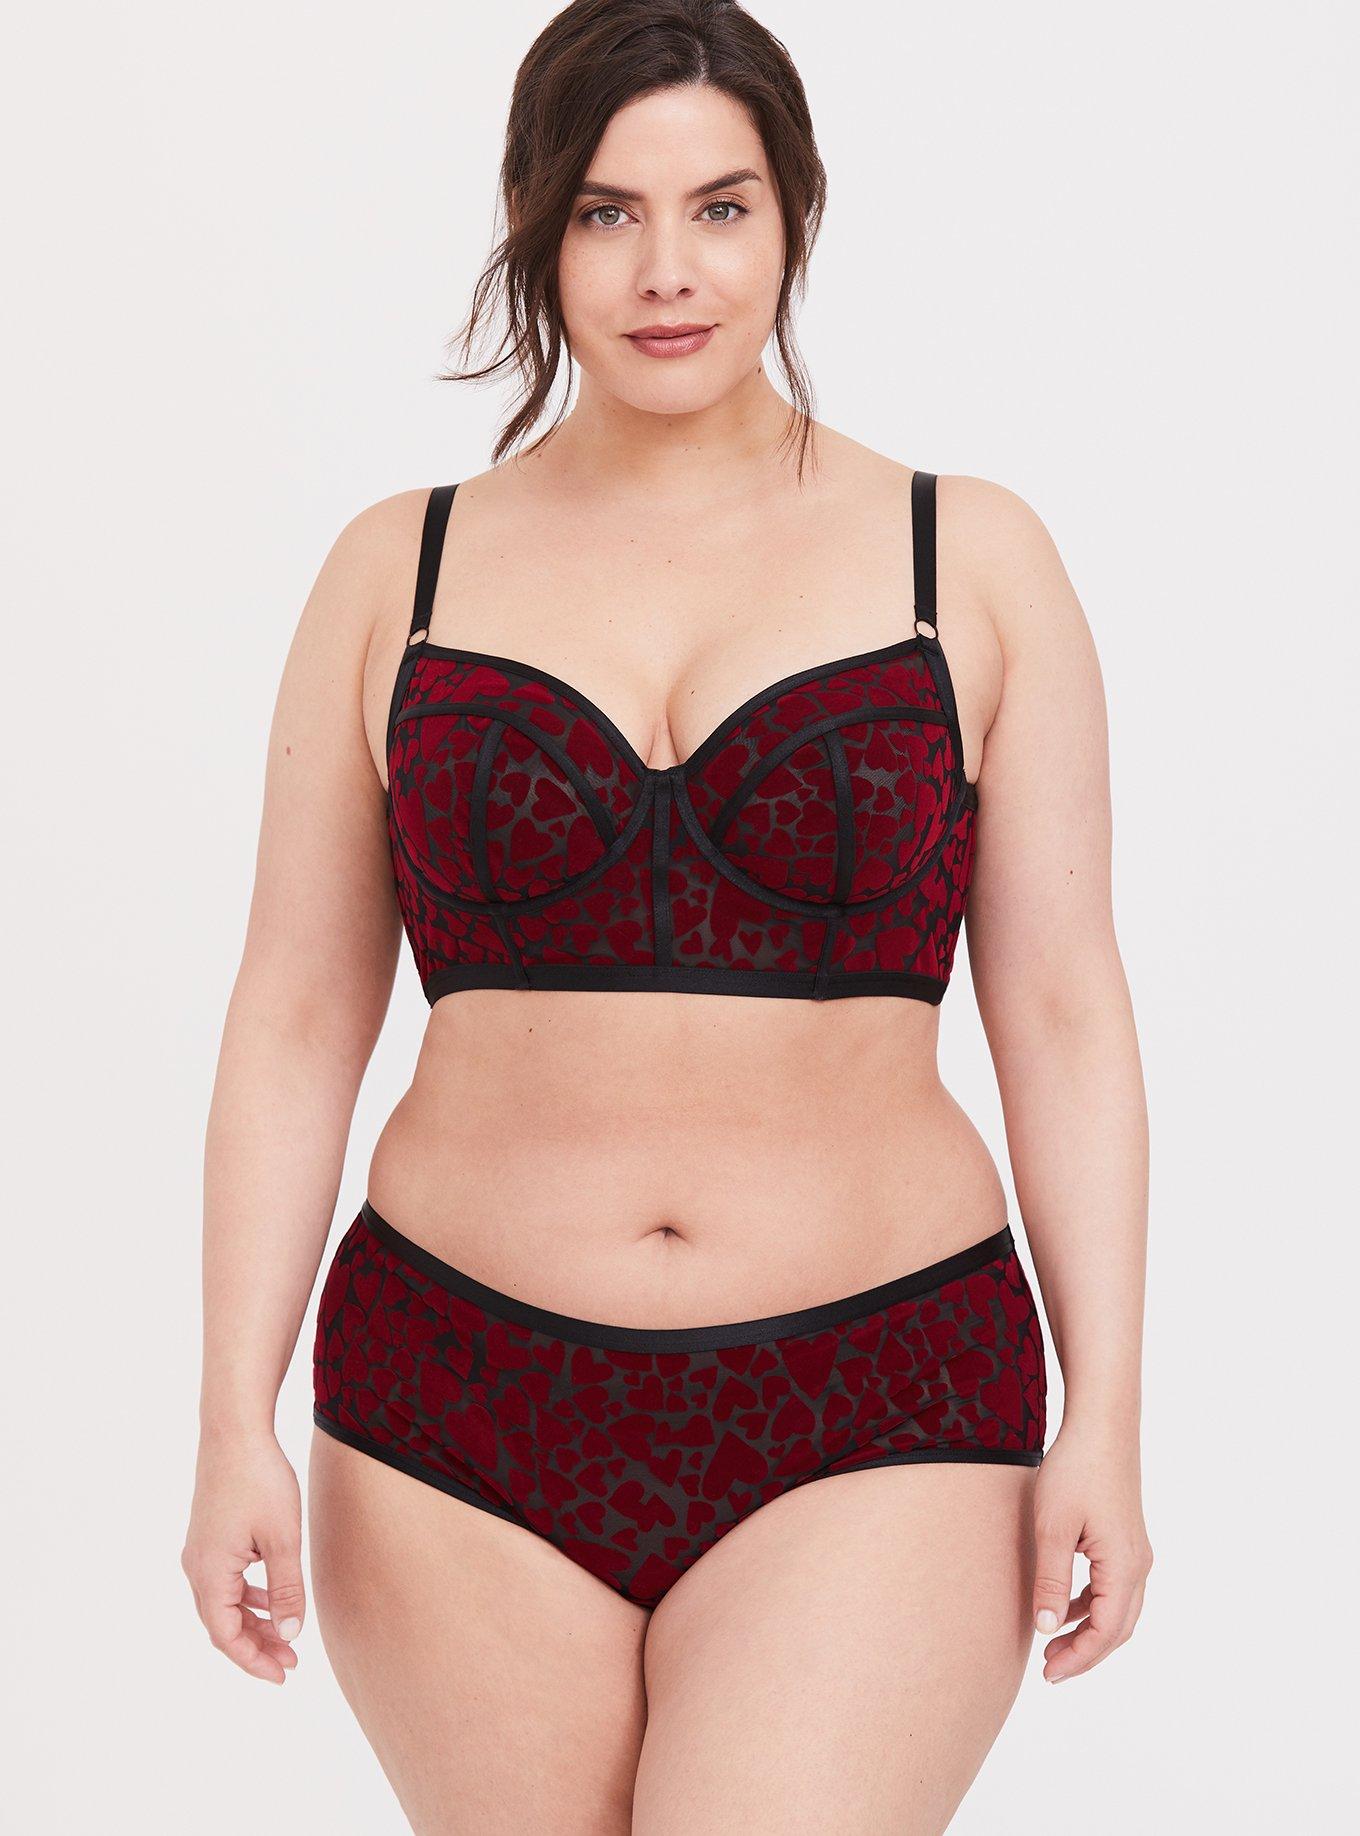 Plus Size - Black Mesh & Red Heart Flocked Cutout Cheeky Panty